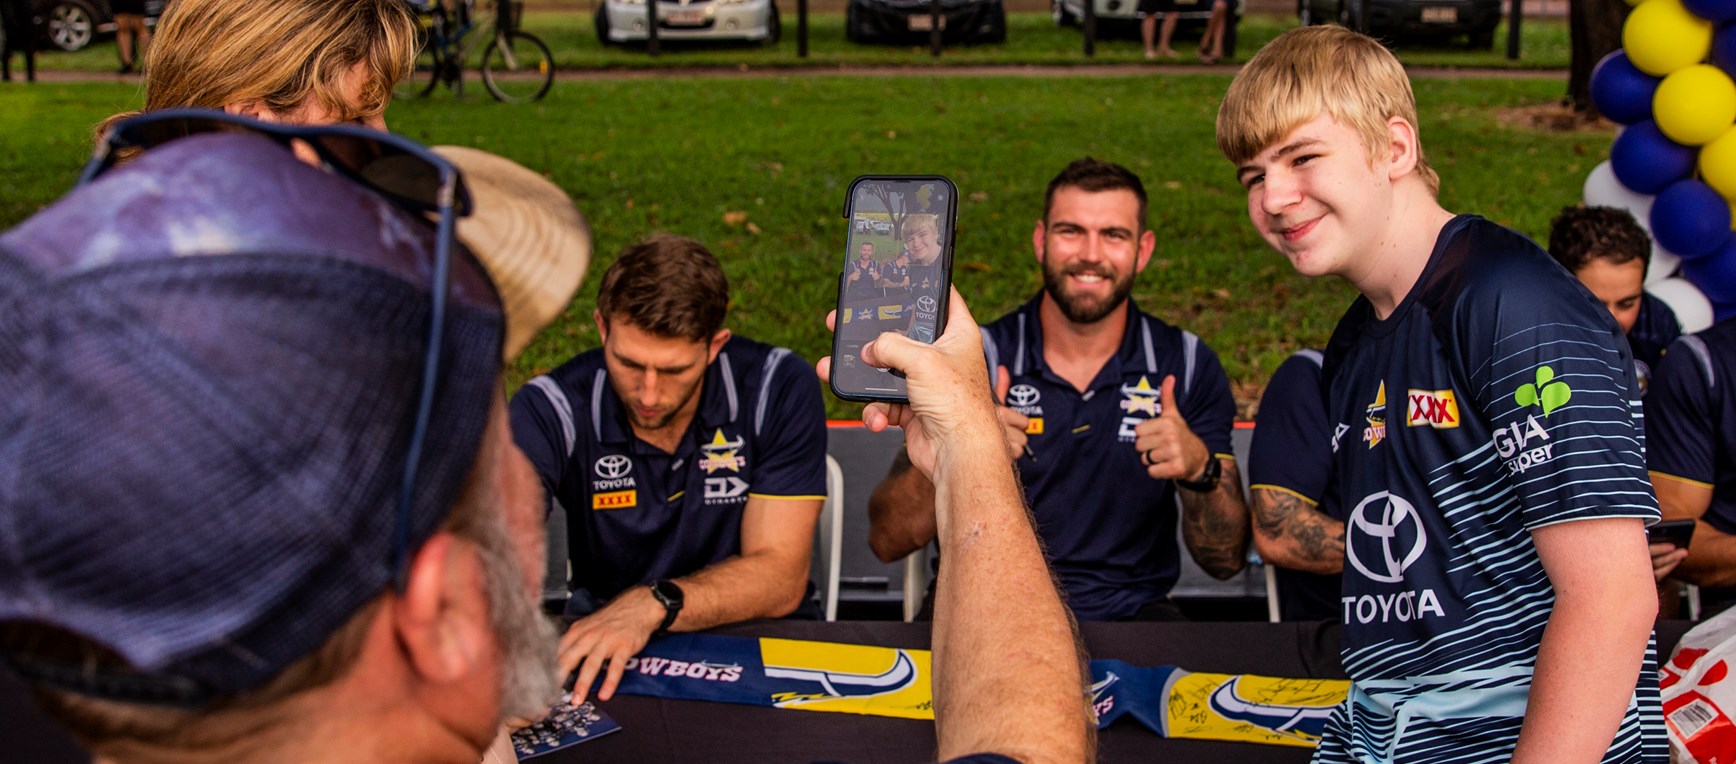 Cowboys signing session in Darwin